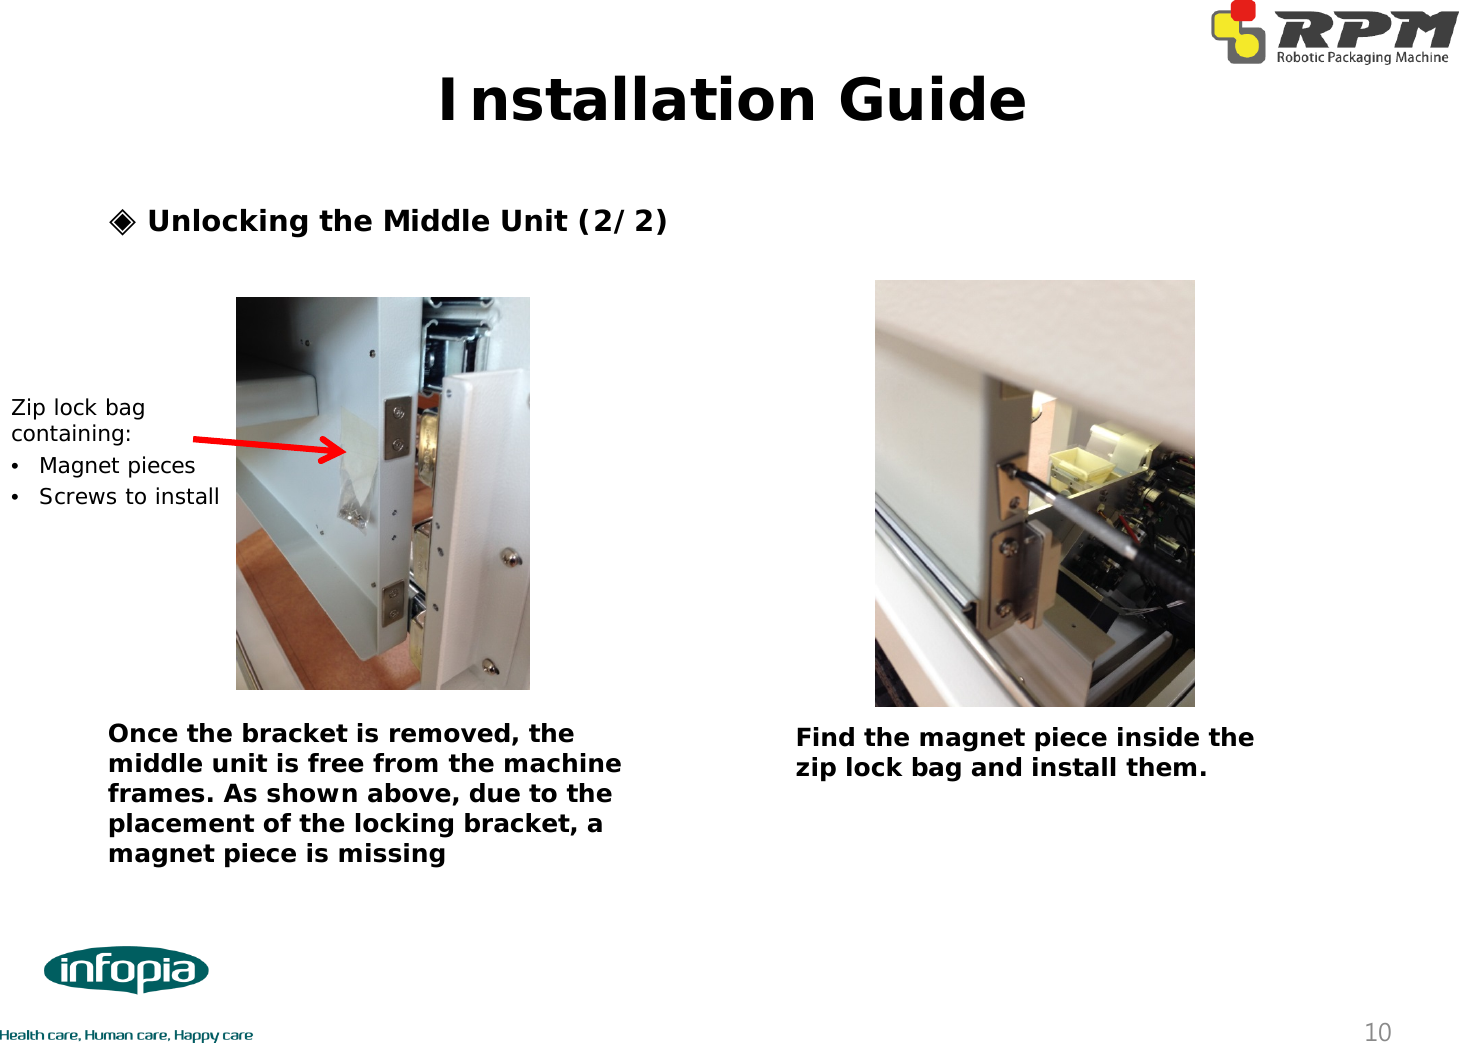 Installation Guide10◈Unlocking the Middle Unit (2/2)Find the magnet piece inside the zip lock bag and install them.Once the bracket is removed, the middle unit is free from the machine frames. As shown above, due to the placement of the locking bracket, a magnet piece is missingZip lock bag containing:•Magnet pieces•Screws to install